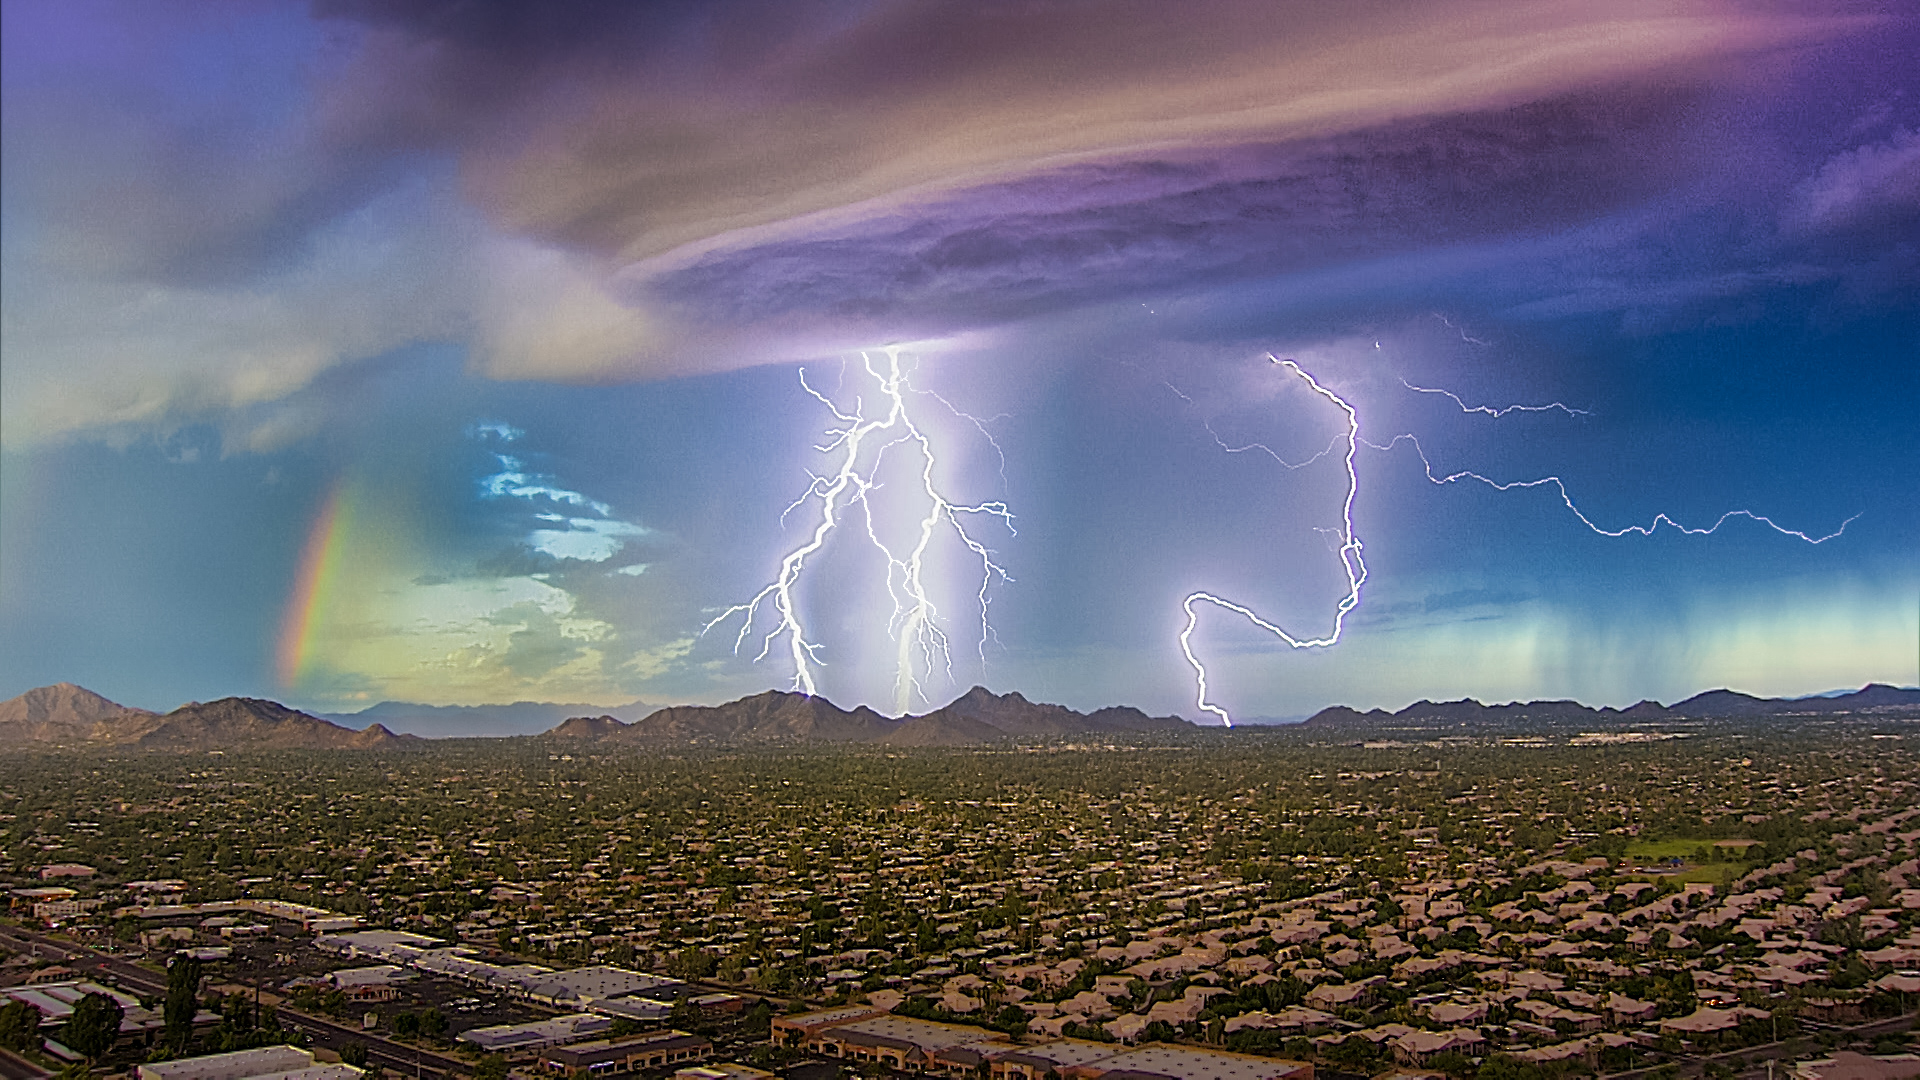 Lightning storm in Arizona with a rainbow nearby